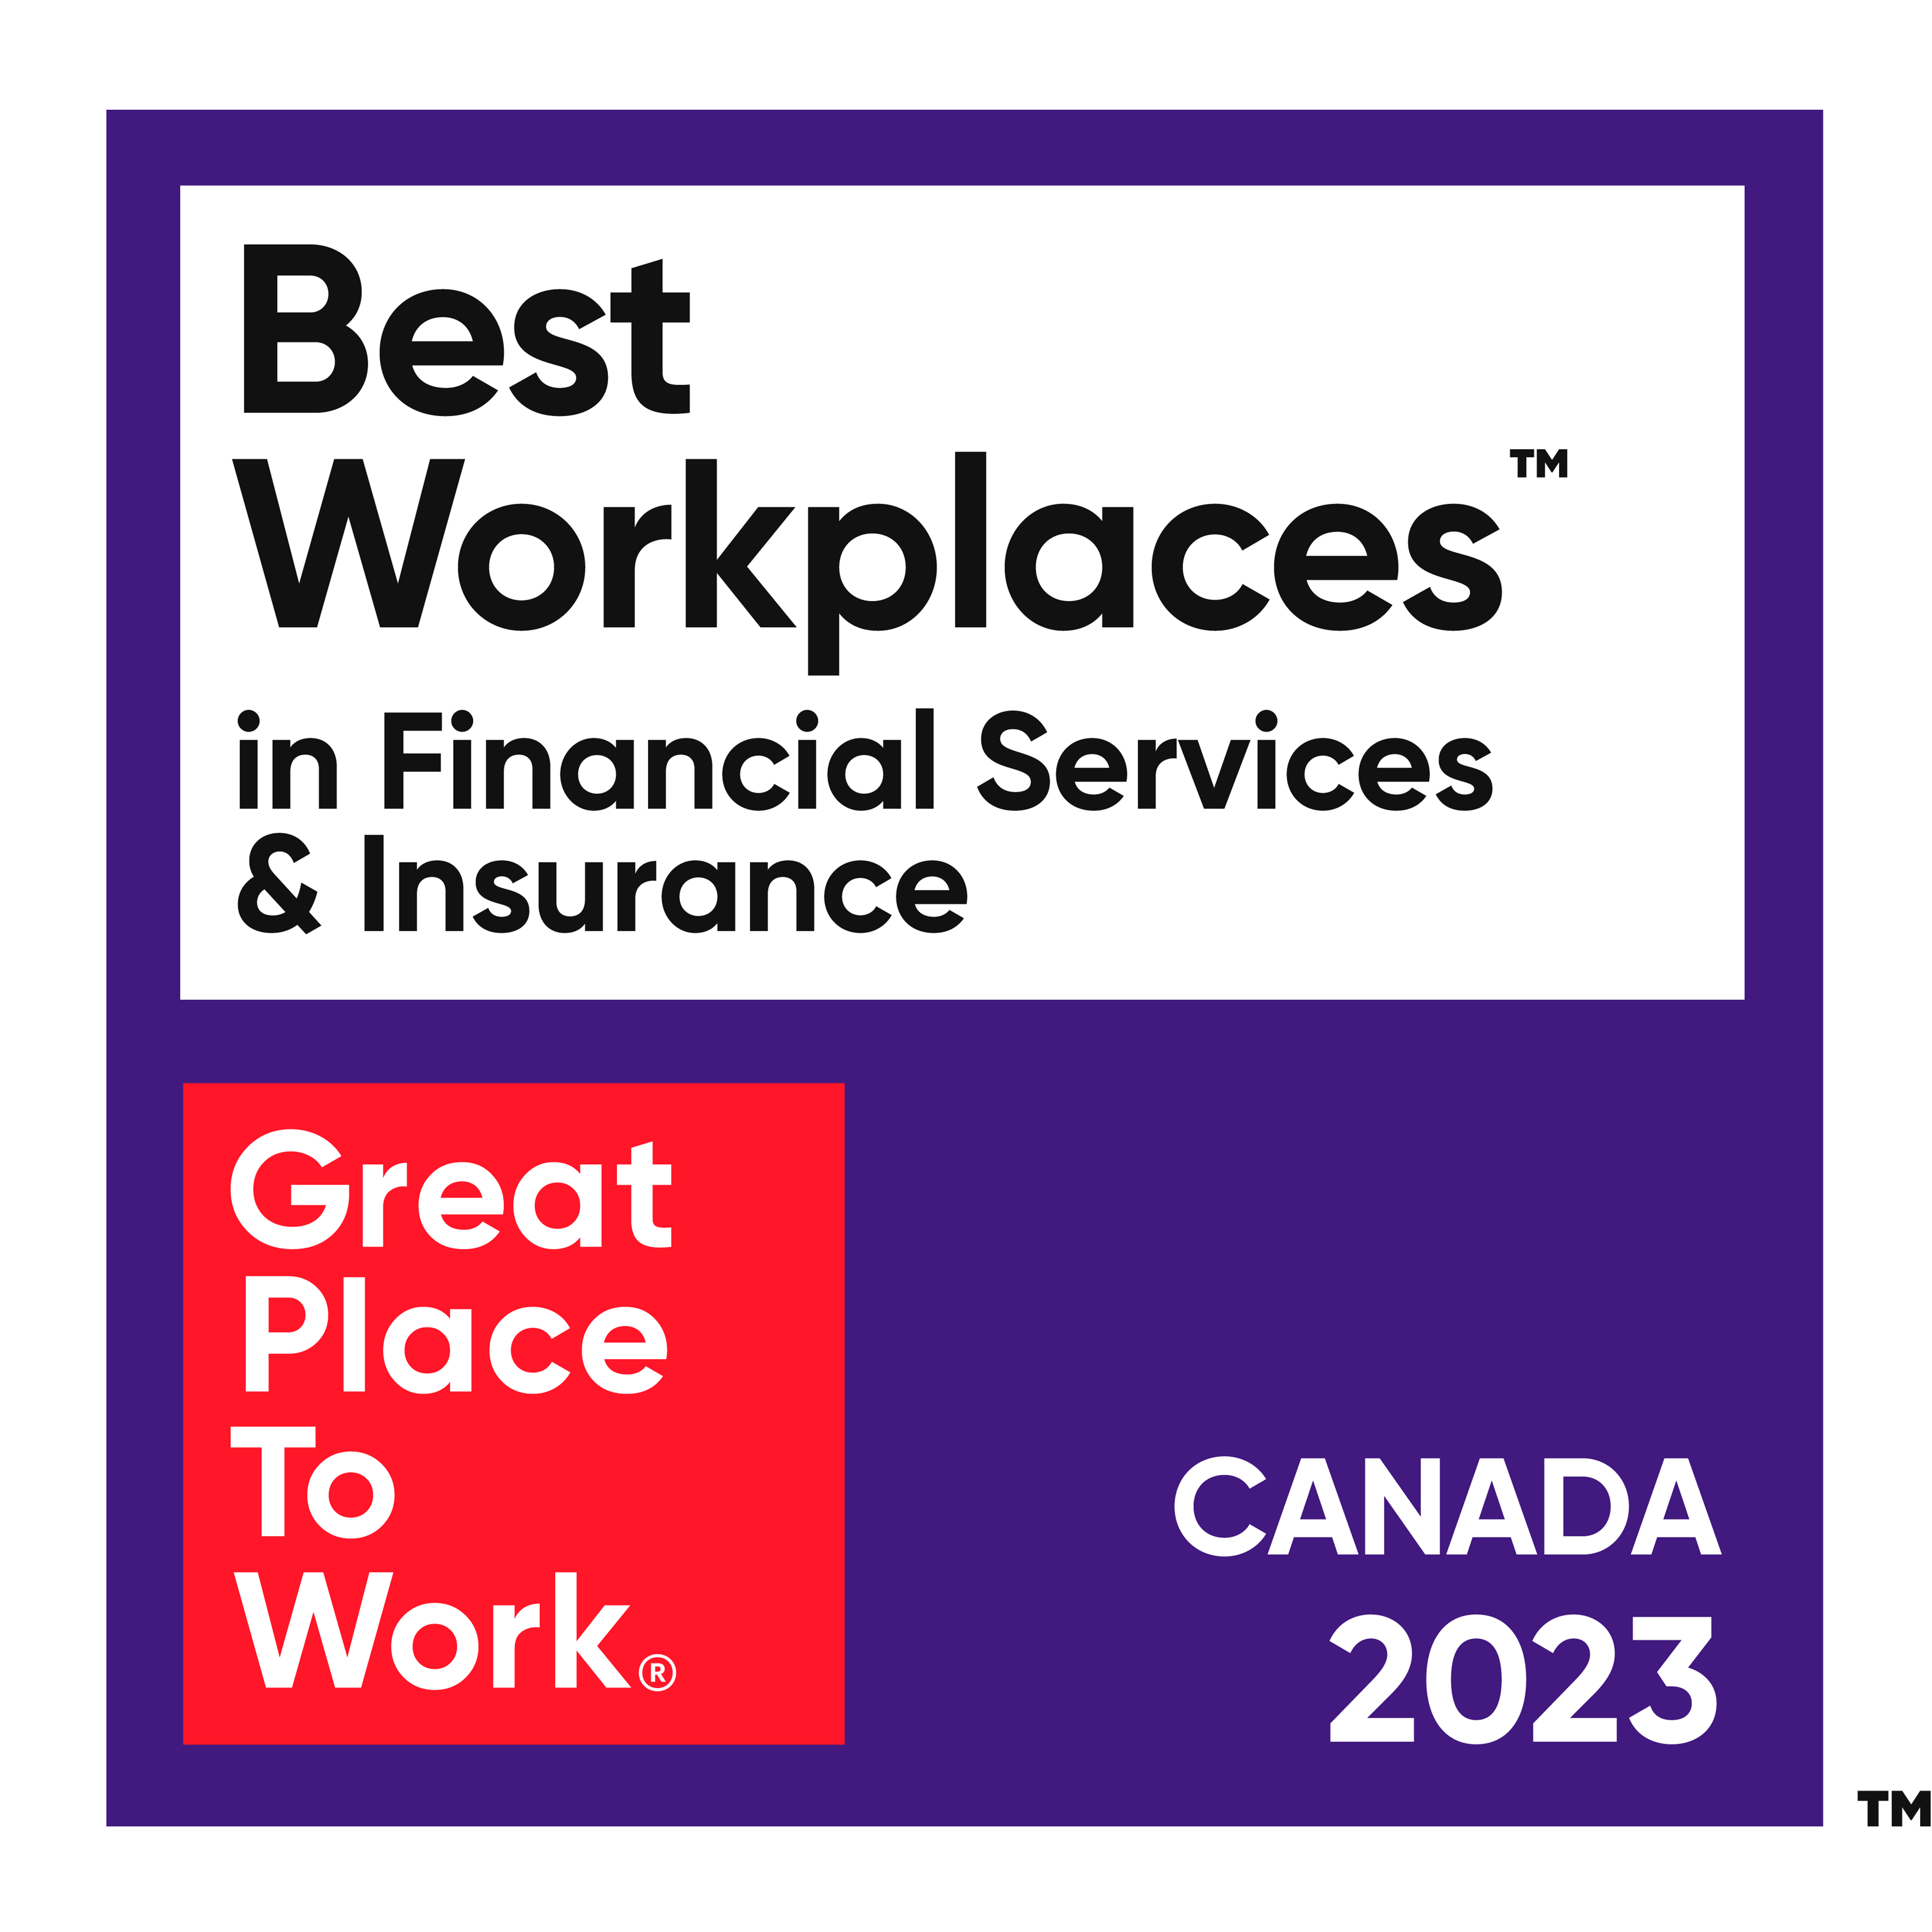 Best Workplaces in Financial Services and Insurance, Great Place to Work Canada 2023